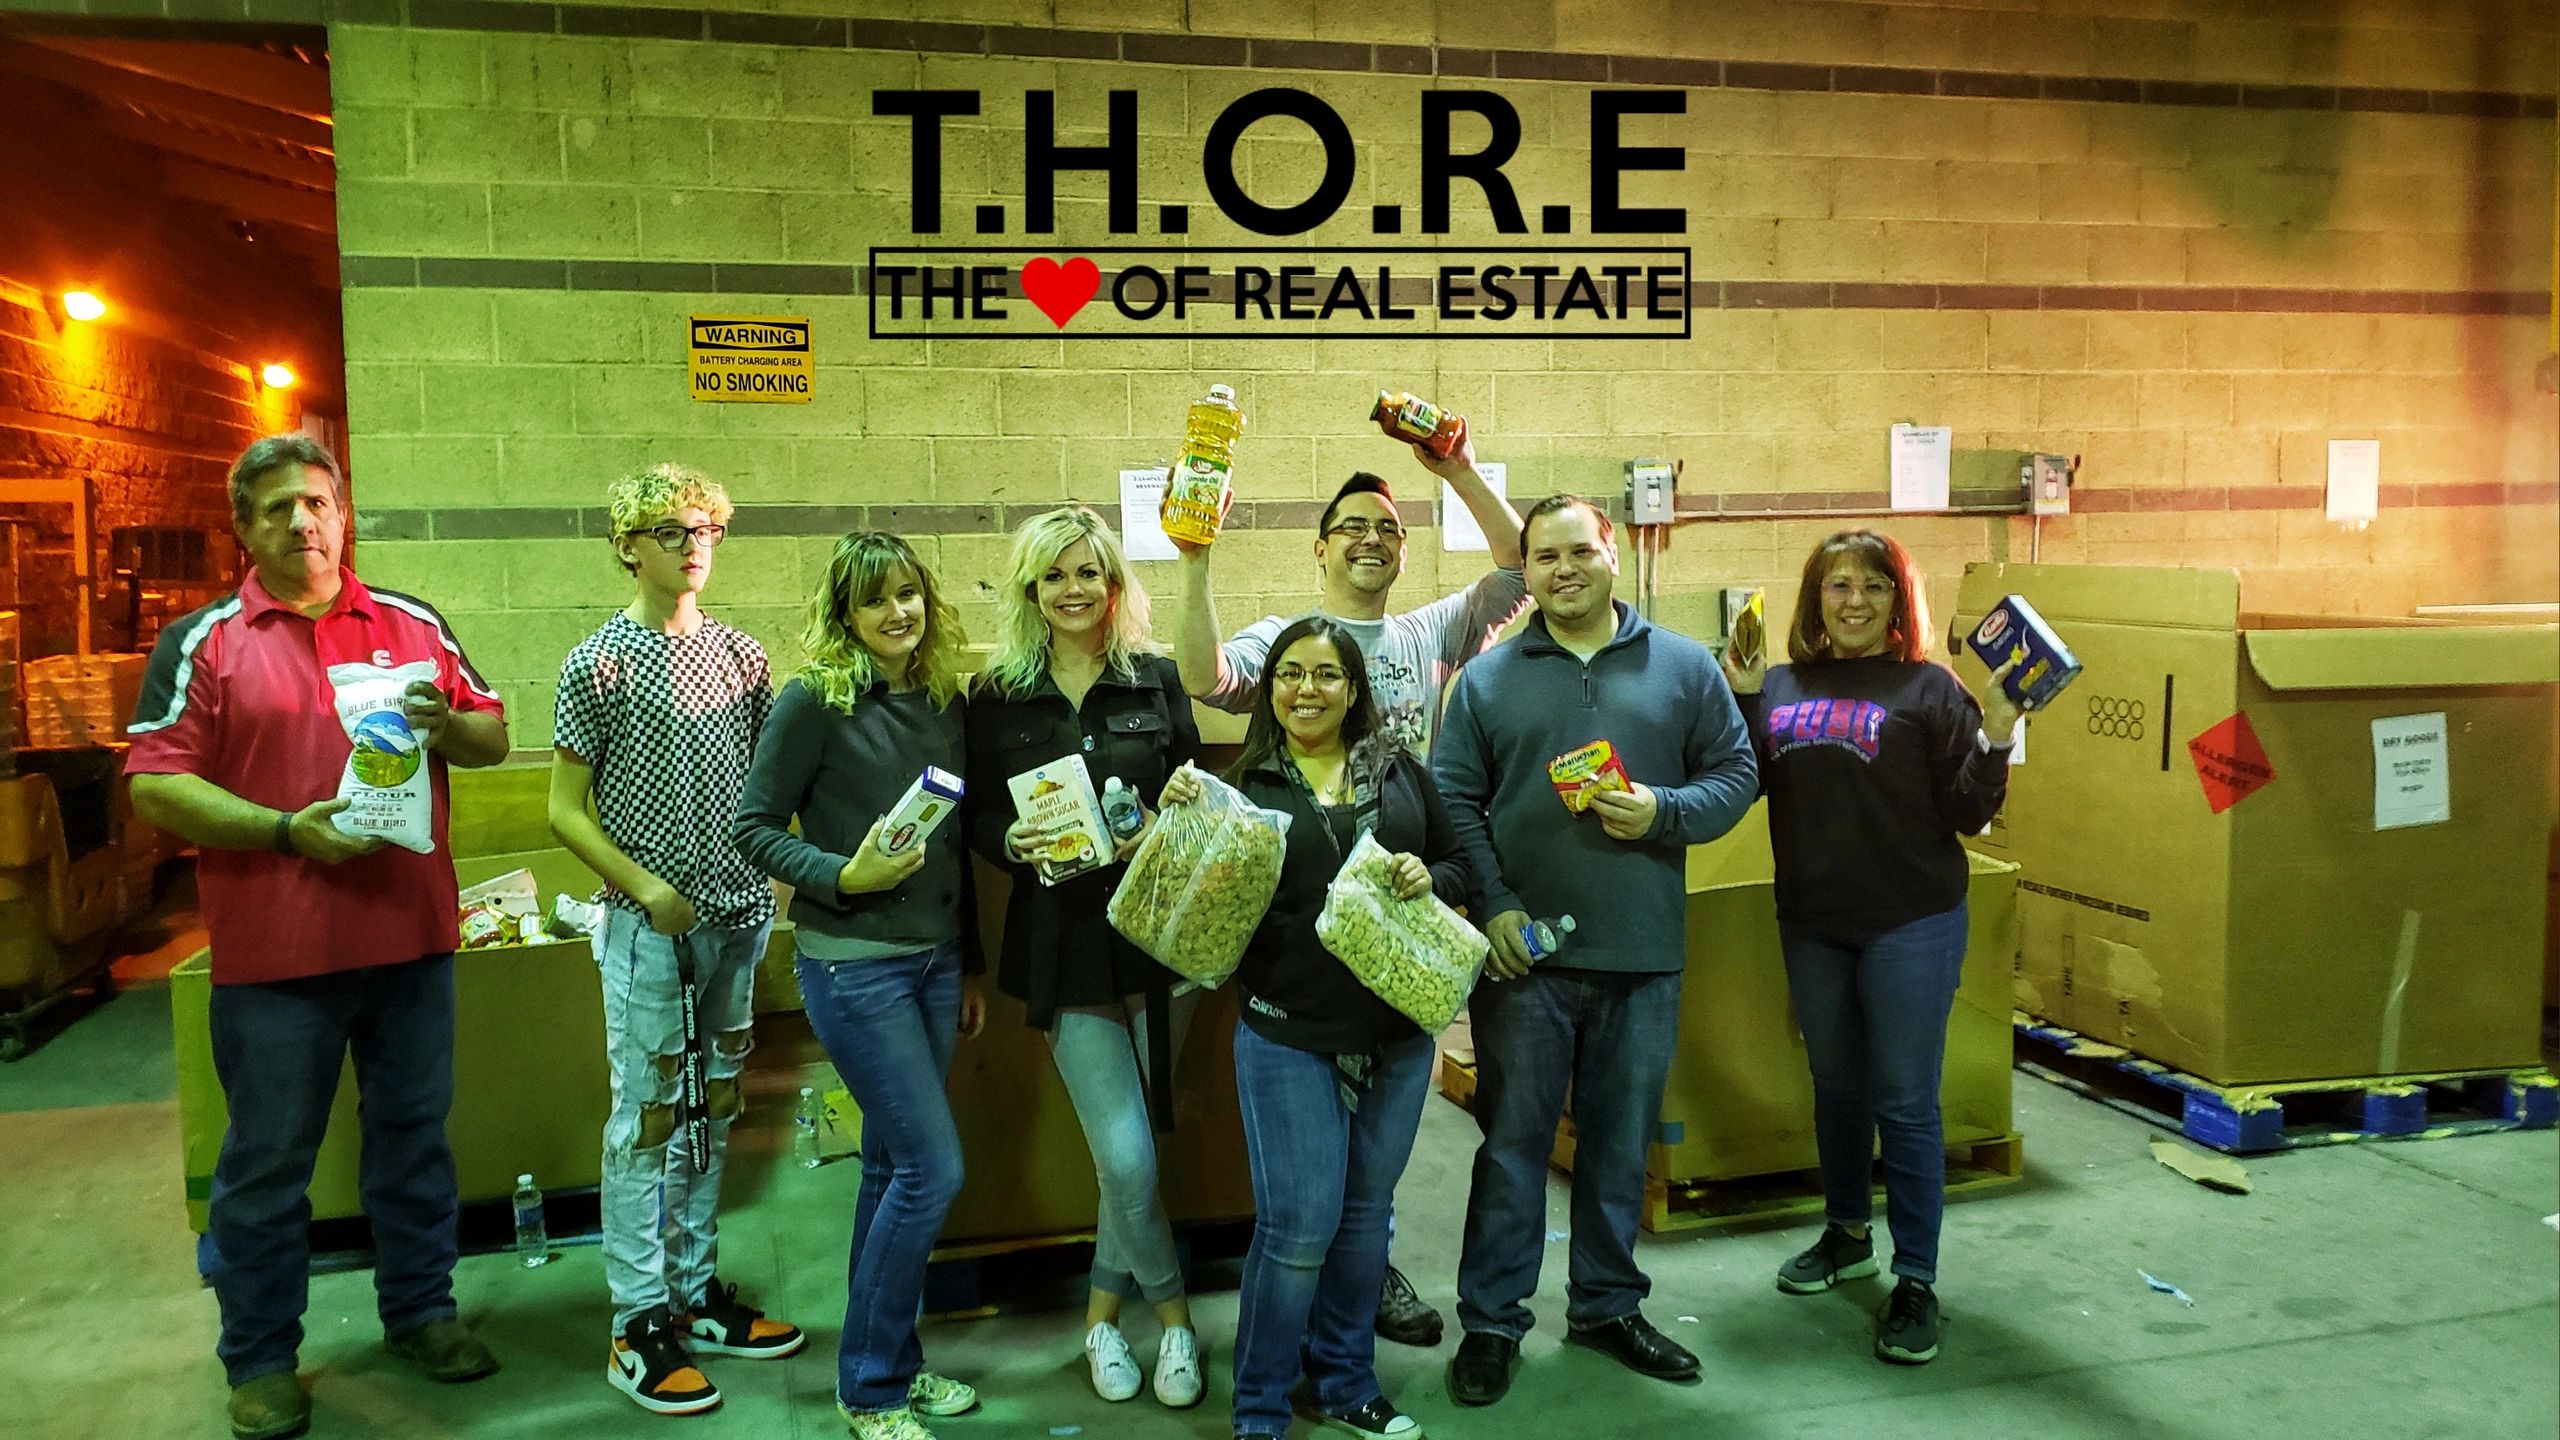 Team T.H.O.R.E coming together to help our community. Volunteering, Making a difference. 